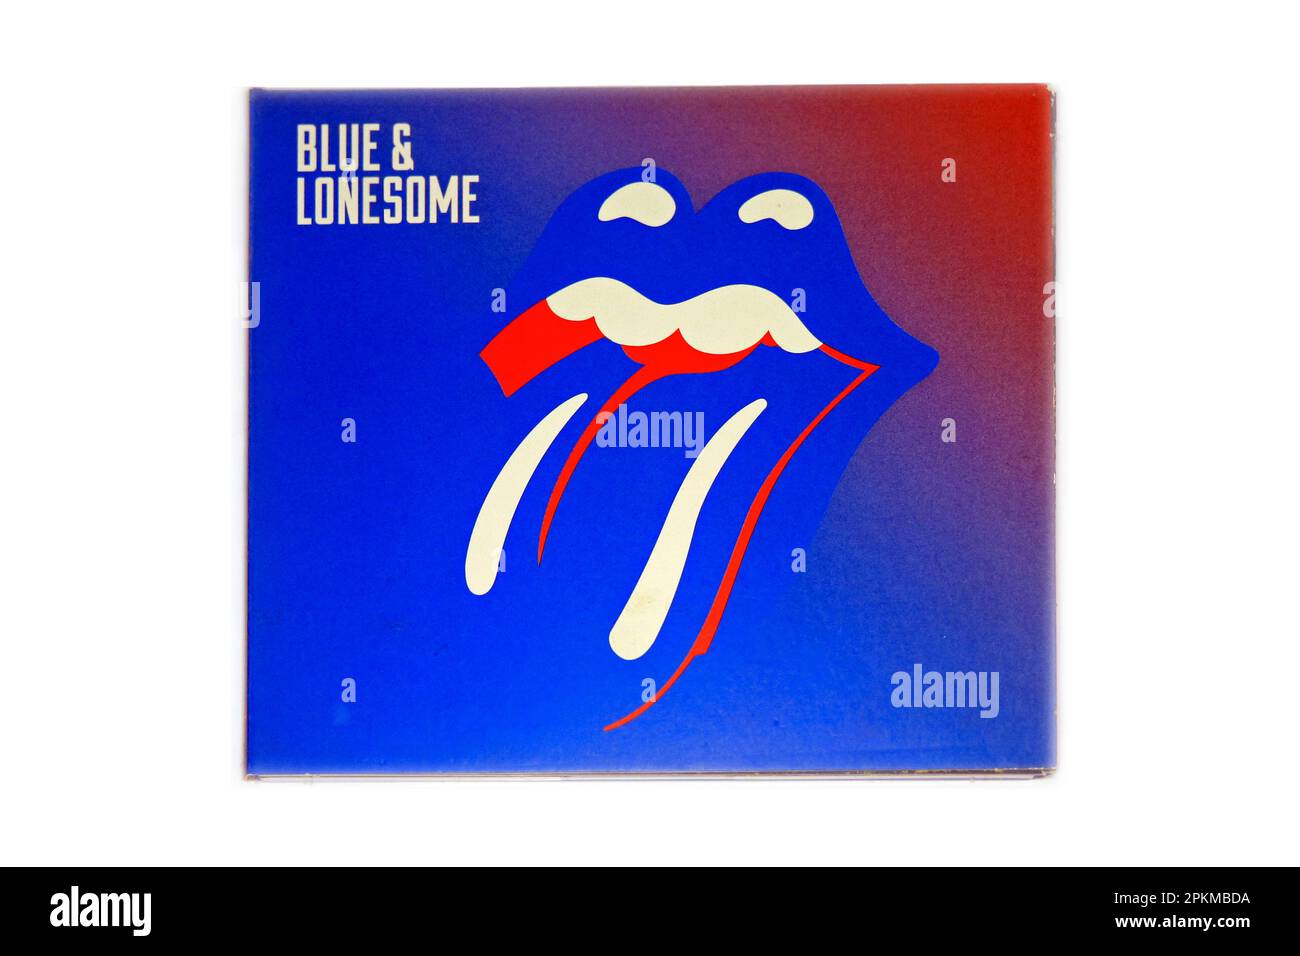 Blue & Lonesome - Rolling Stones card Music CD cover. cym Stock Photo